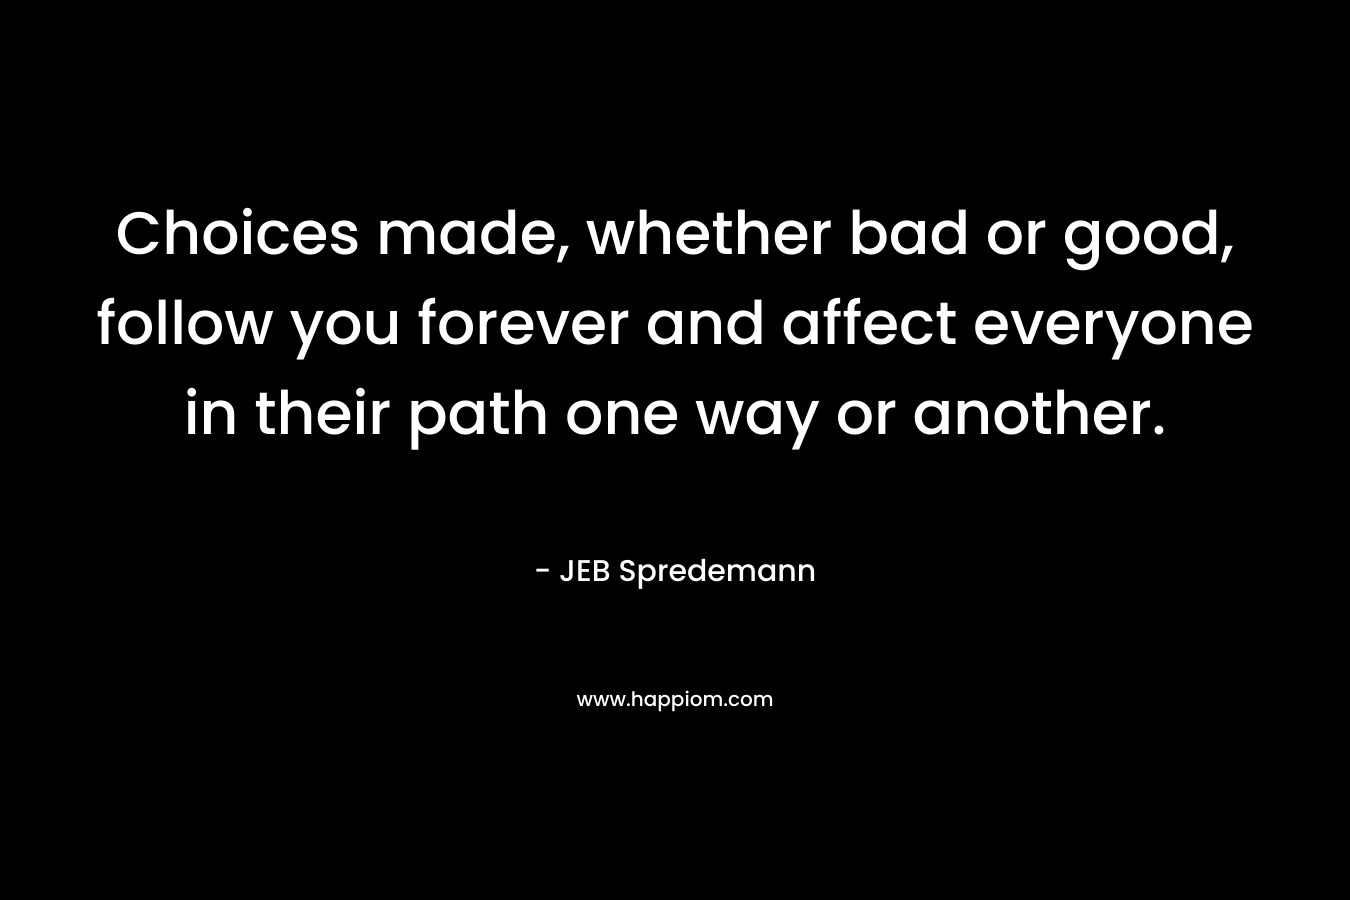 Choices made, whether bad or good, follow you forever and affect everyone in their path one way or another. – JEB Spredemann